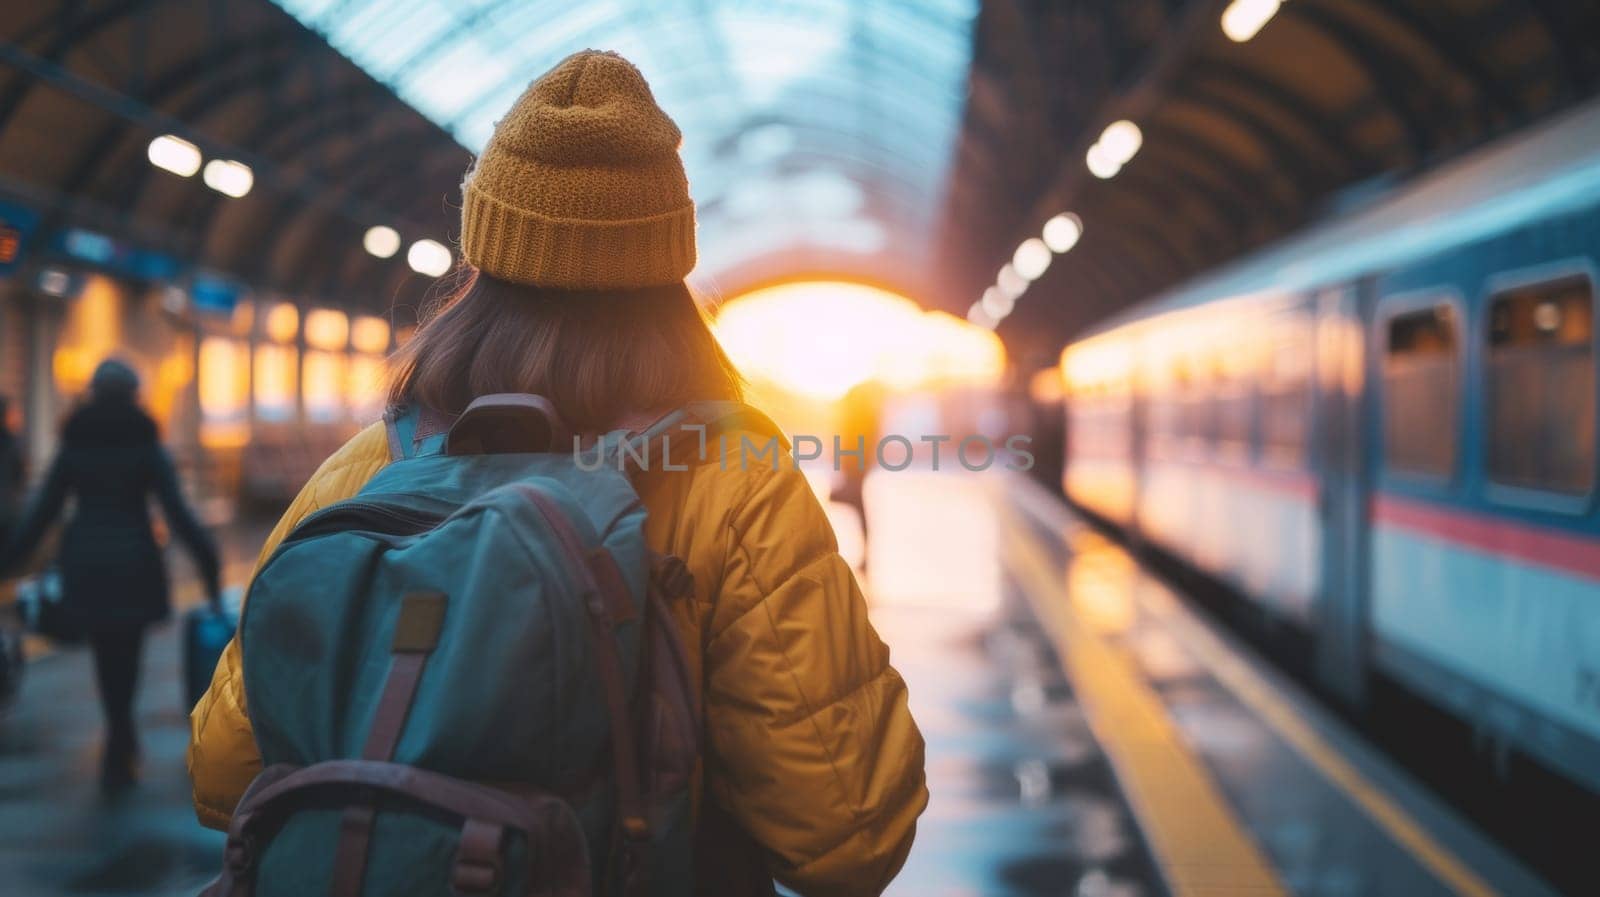 A woman with a backpack standing in front of train